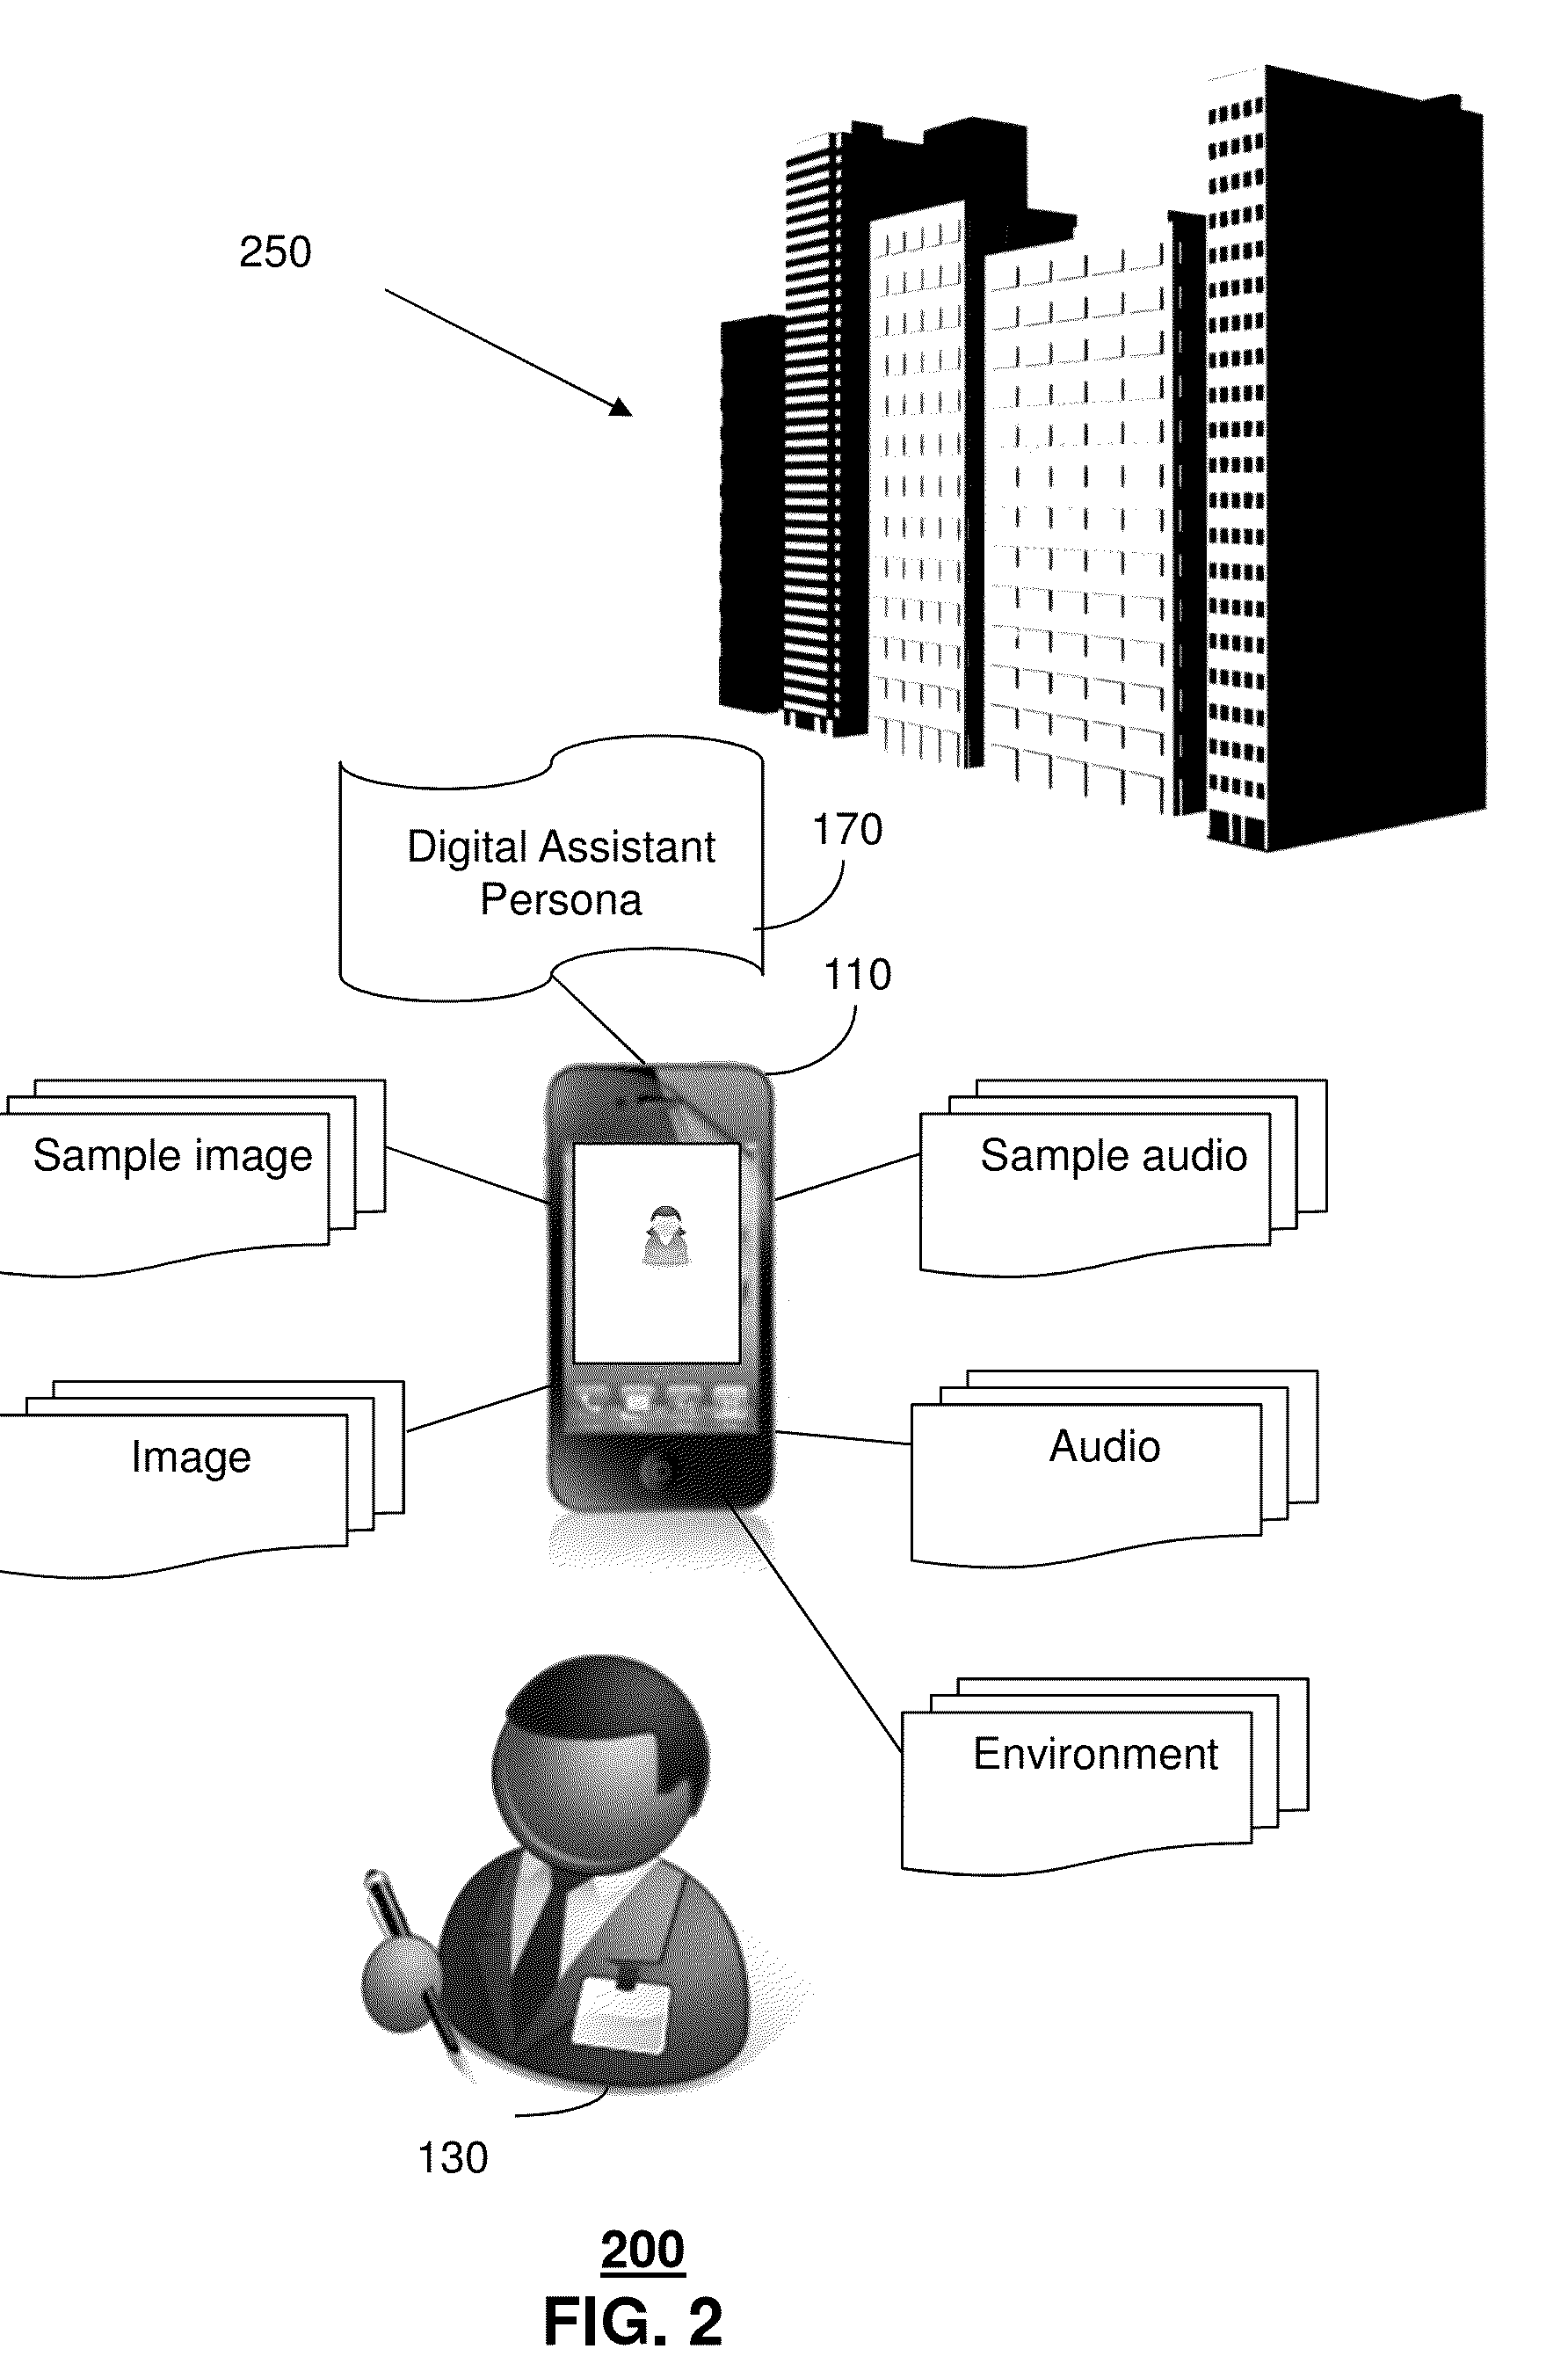 Method and apparatus for adjusting a digital assistant persona